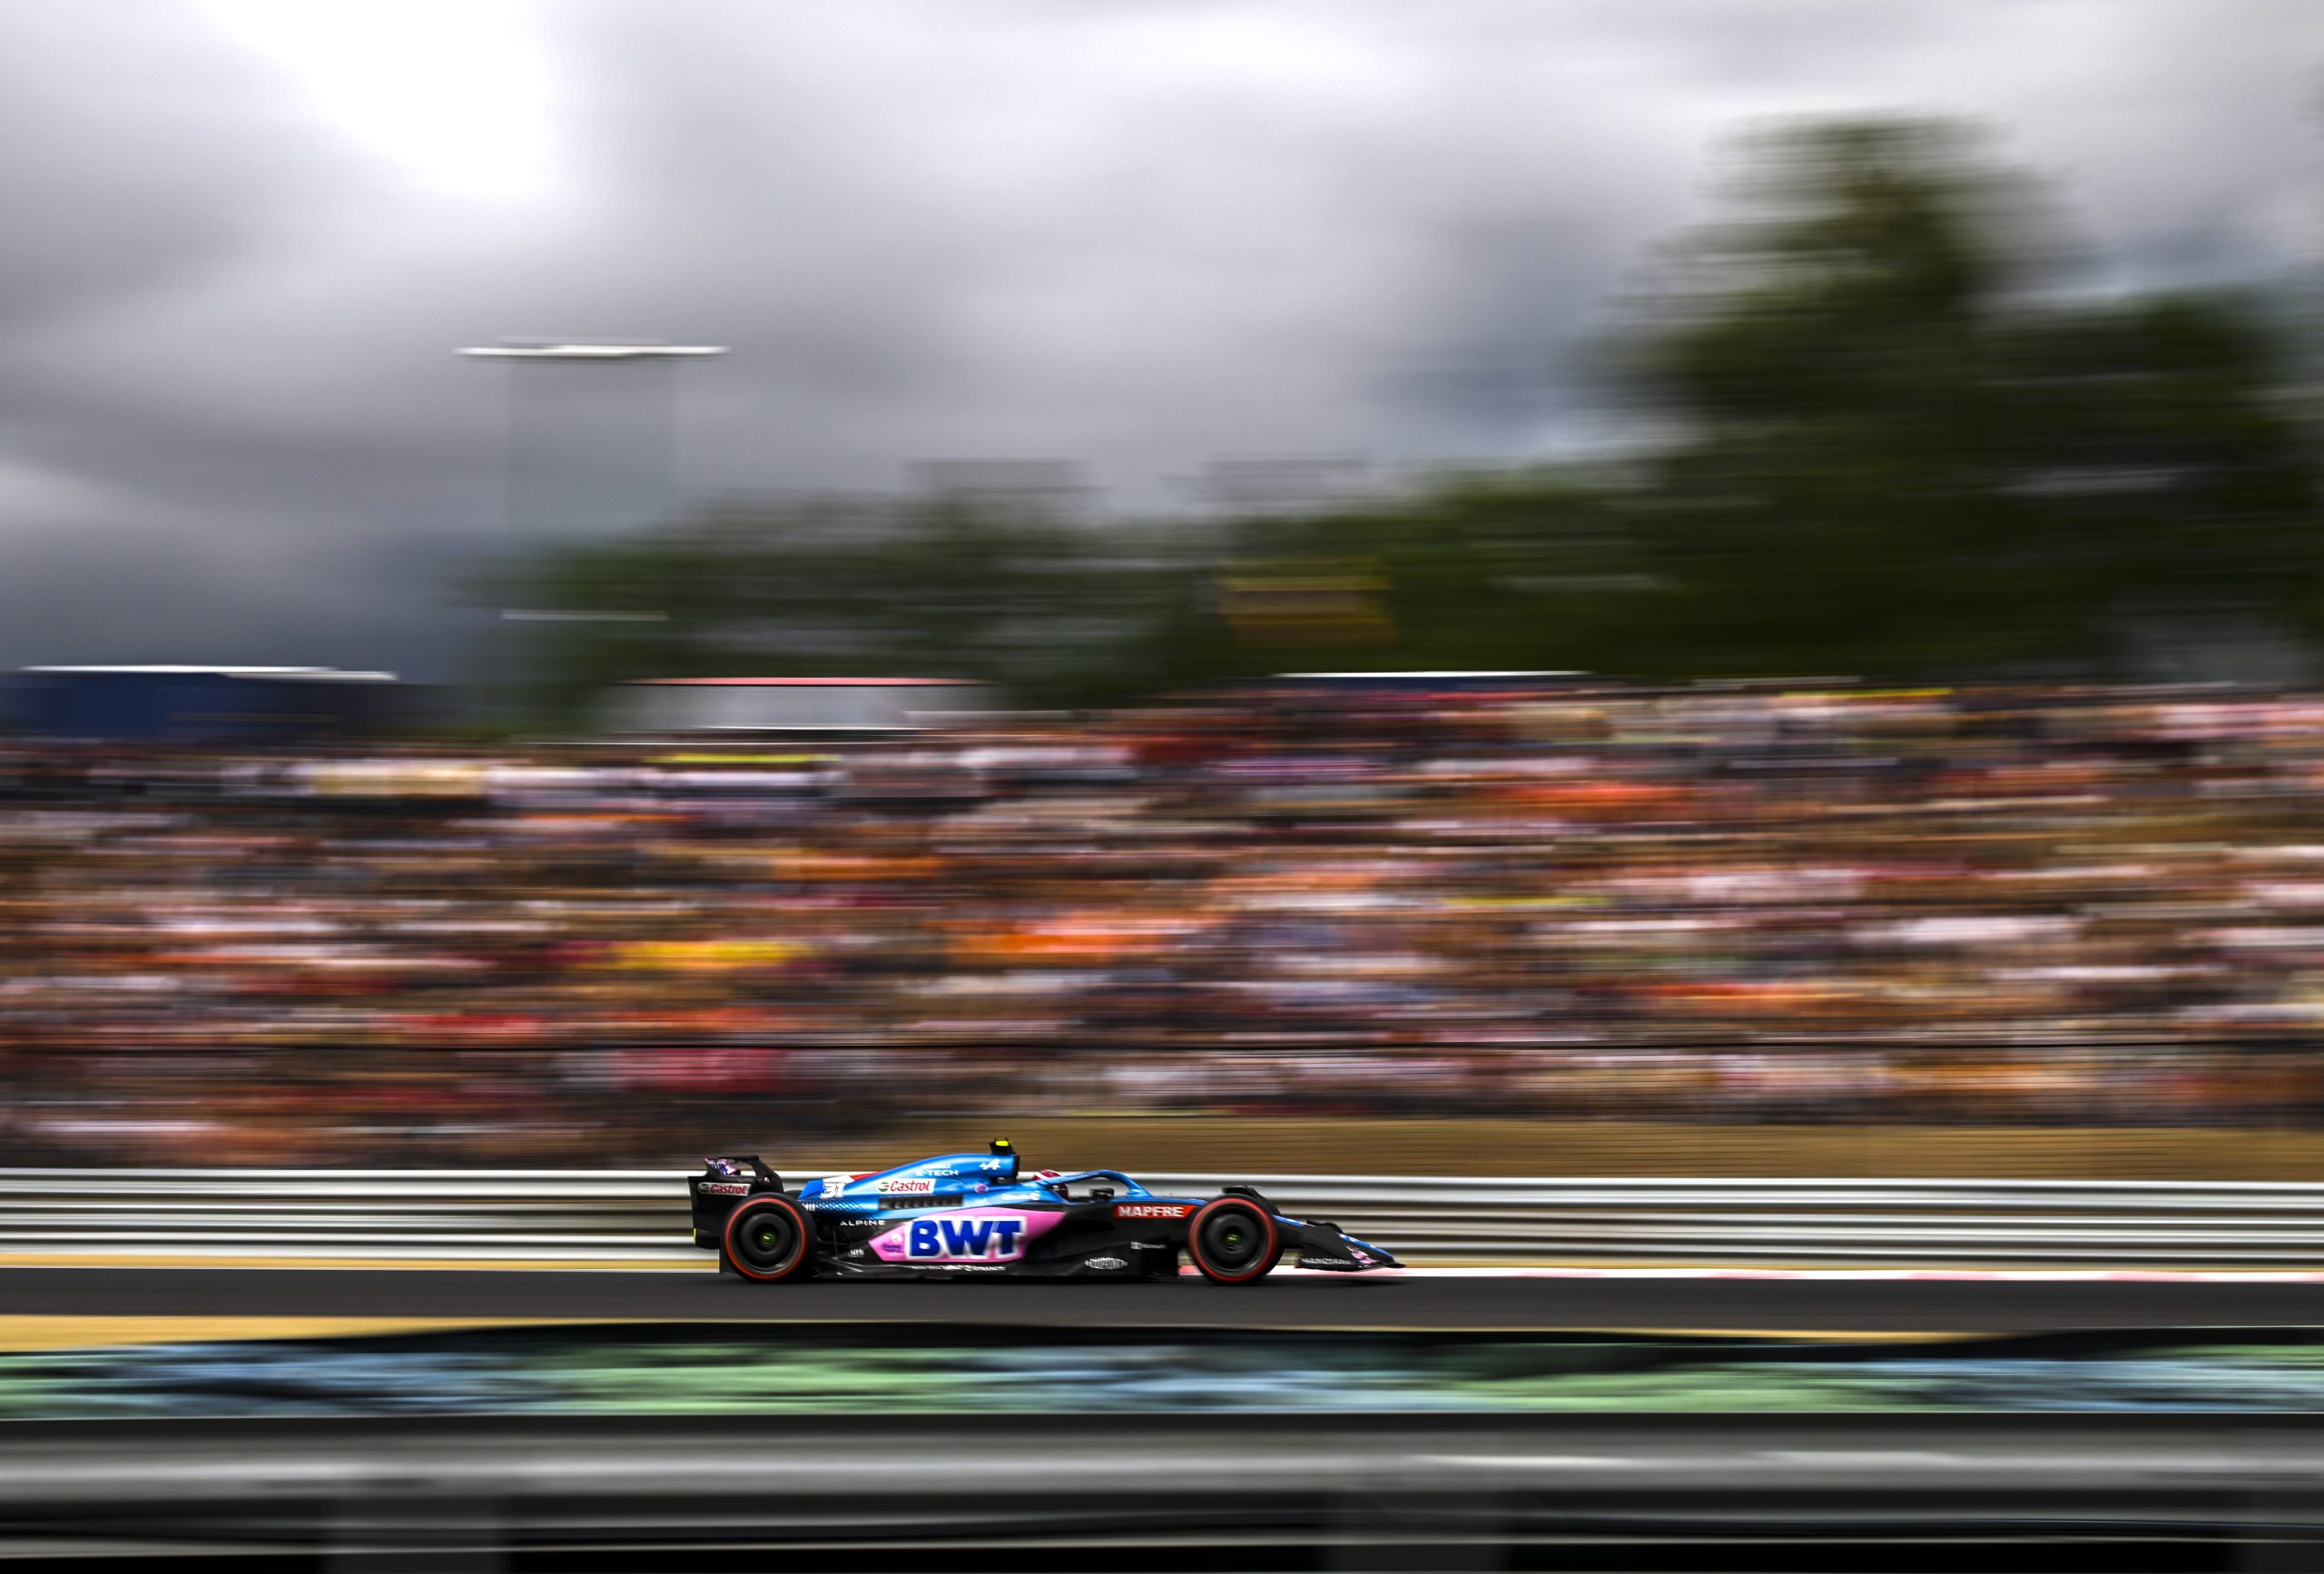 epa10098733 Spanish Formula One driver Fernando Alonso of Alpine F1 Team in action during the qualification session of the Formula One Grand Prix of Hungary at the Hungaroring circuit in Mogyorod, near Budapest, Hungary, 30 July 2022. The Formula One Grand Prix of Hungary will take place on 31 July 2022.  EPA/CHRISTIAN BRUNA